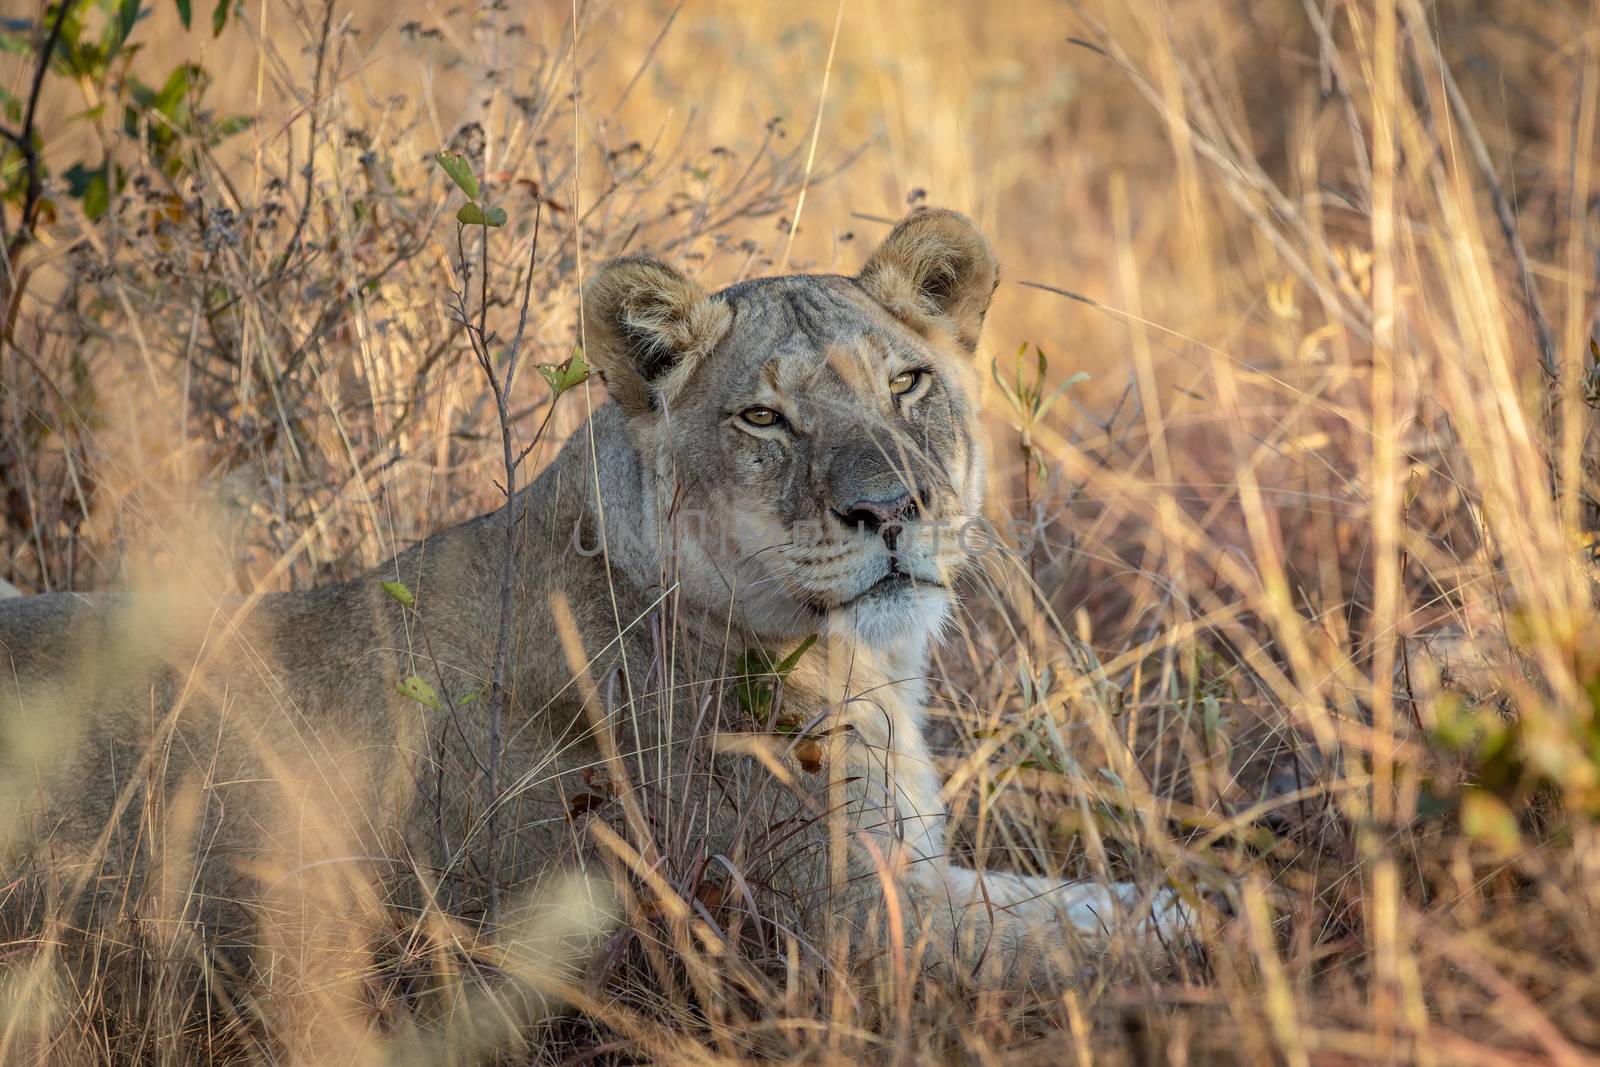 Lioness laying in the grass in the Welgevonden game reserve, South Africa.